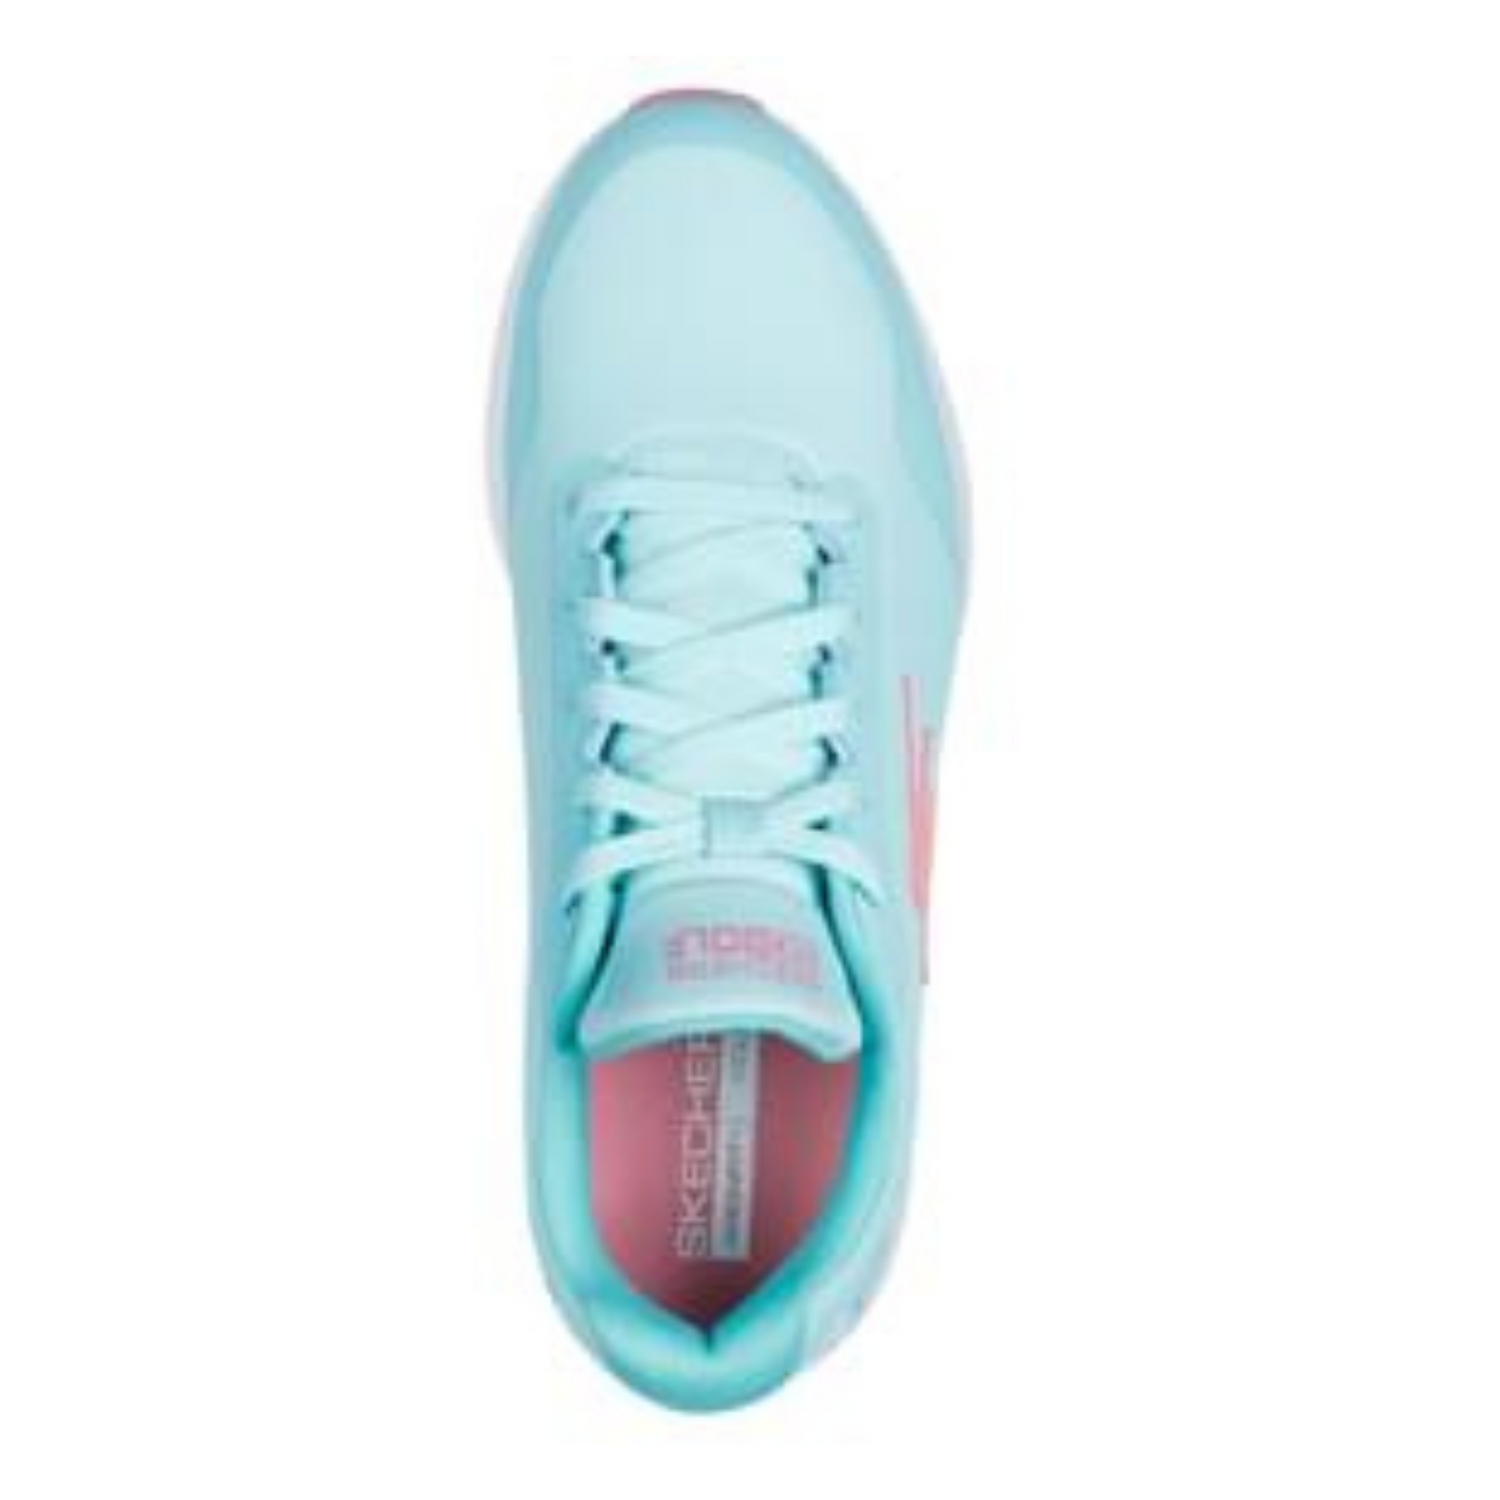 Skechers Go Golf Max 3 Ladies Spikeless Golf Shoes 123080 - Teal   